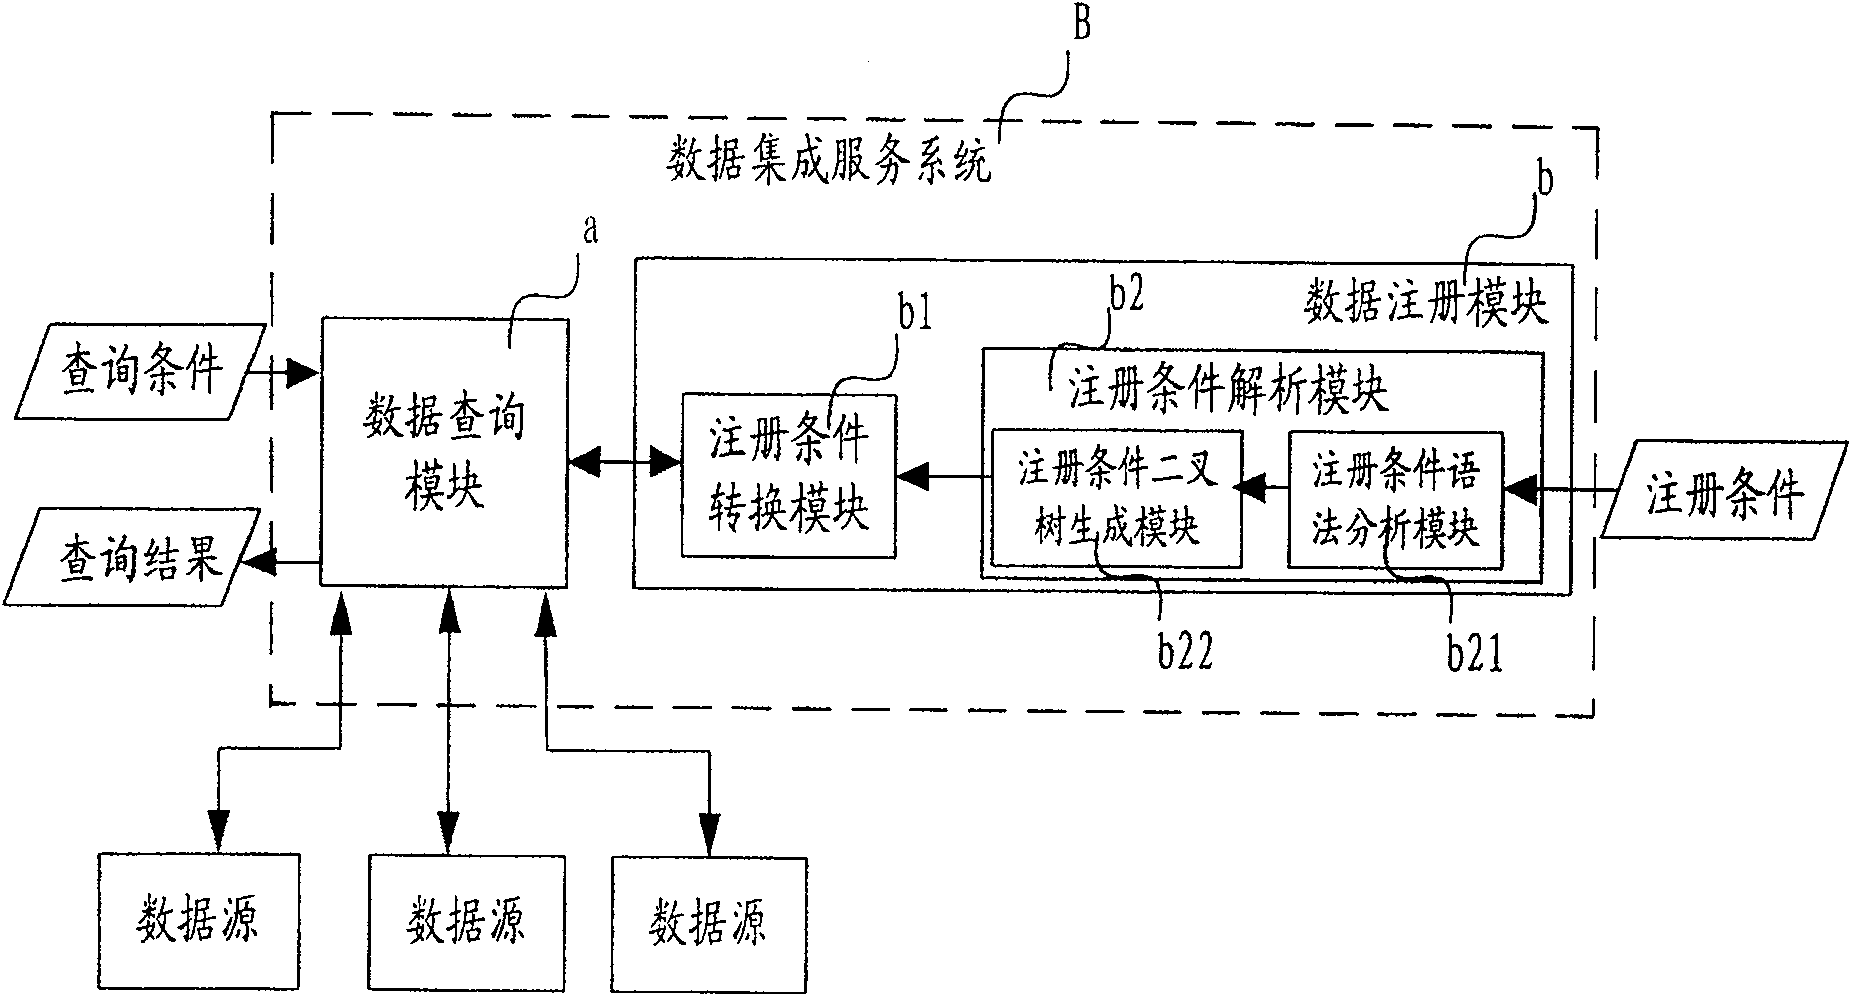 Data integral service system and method